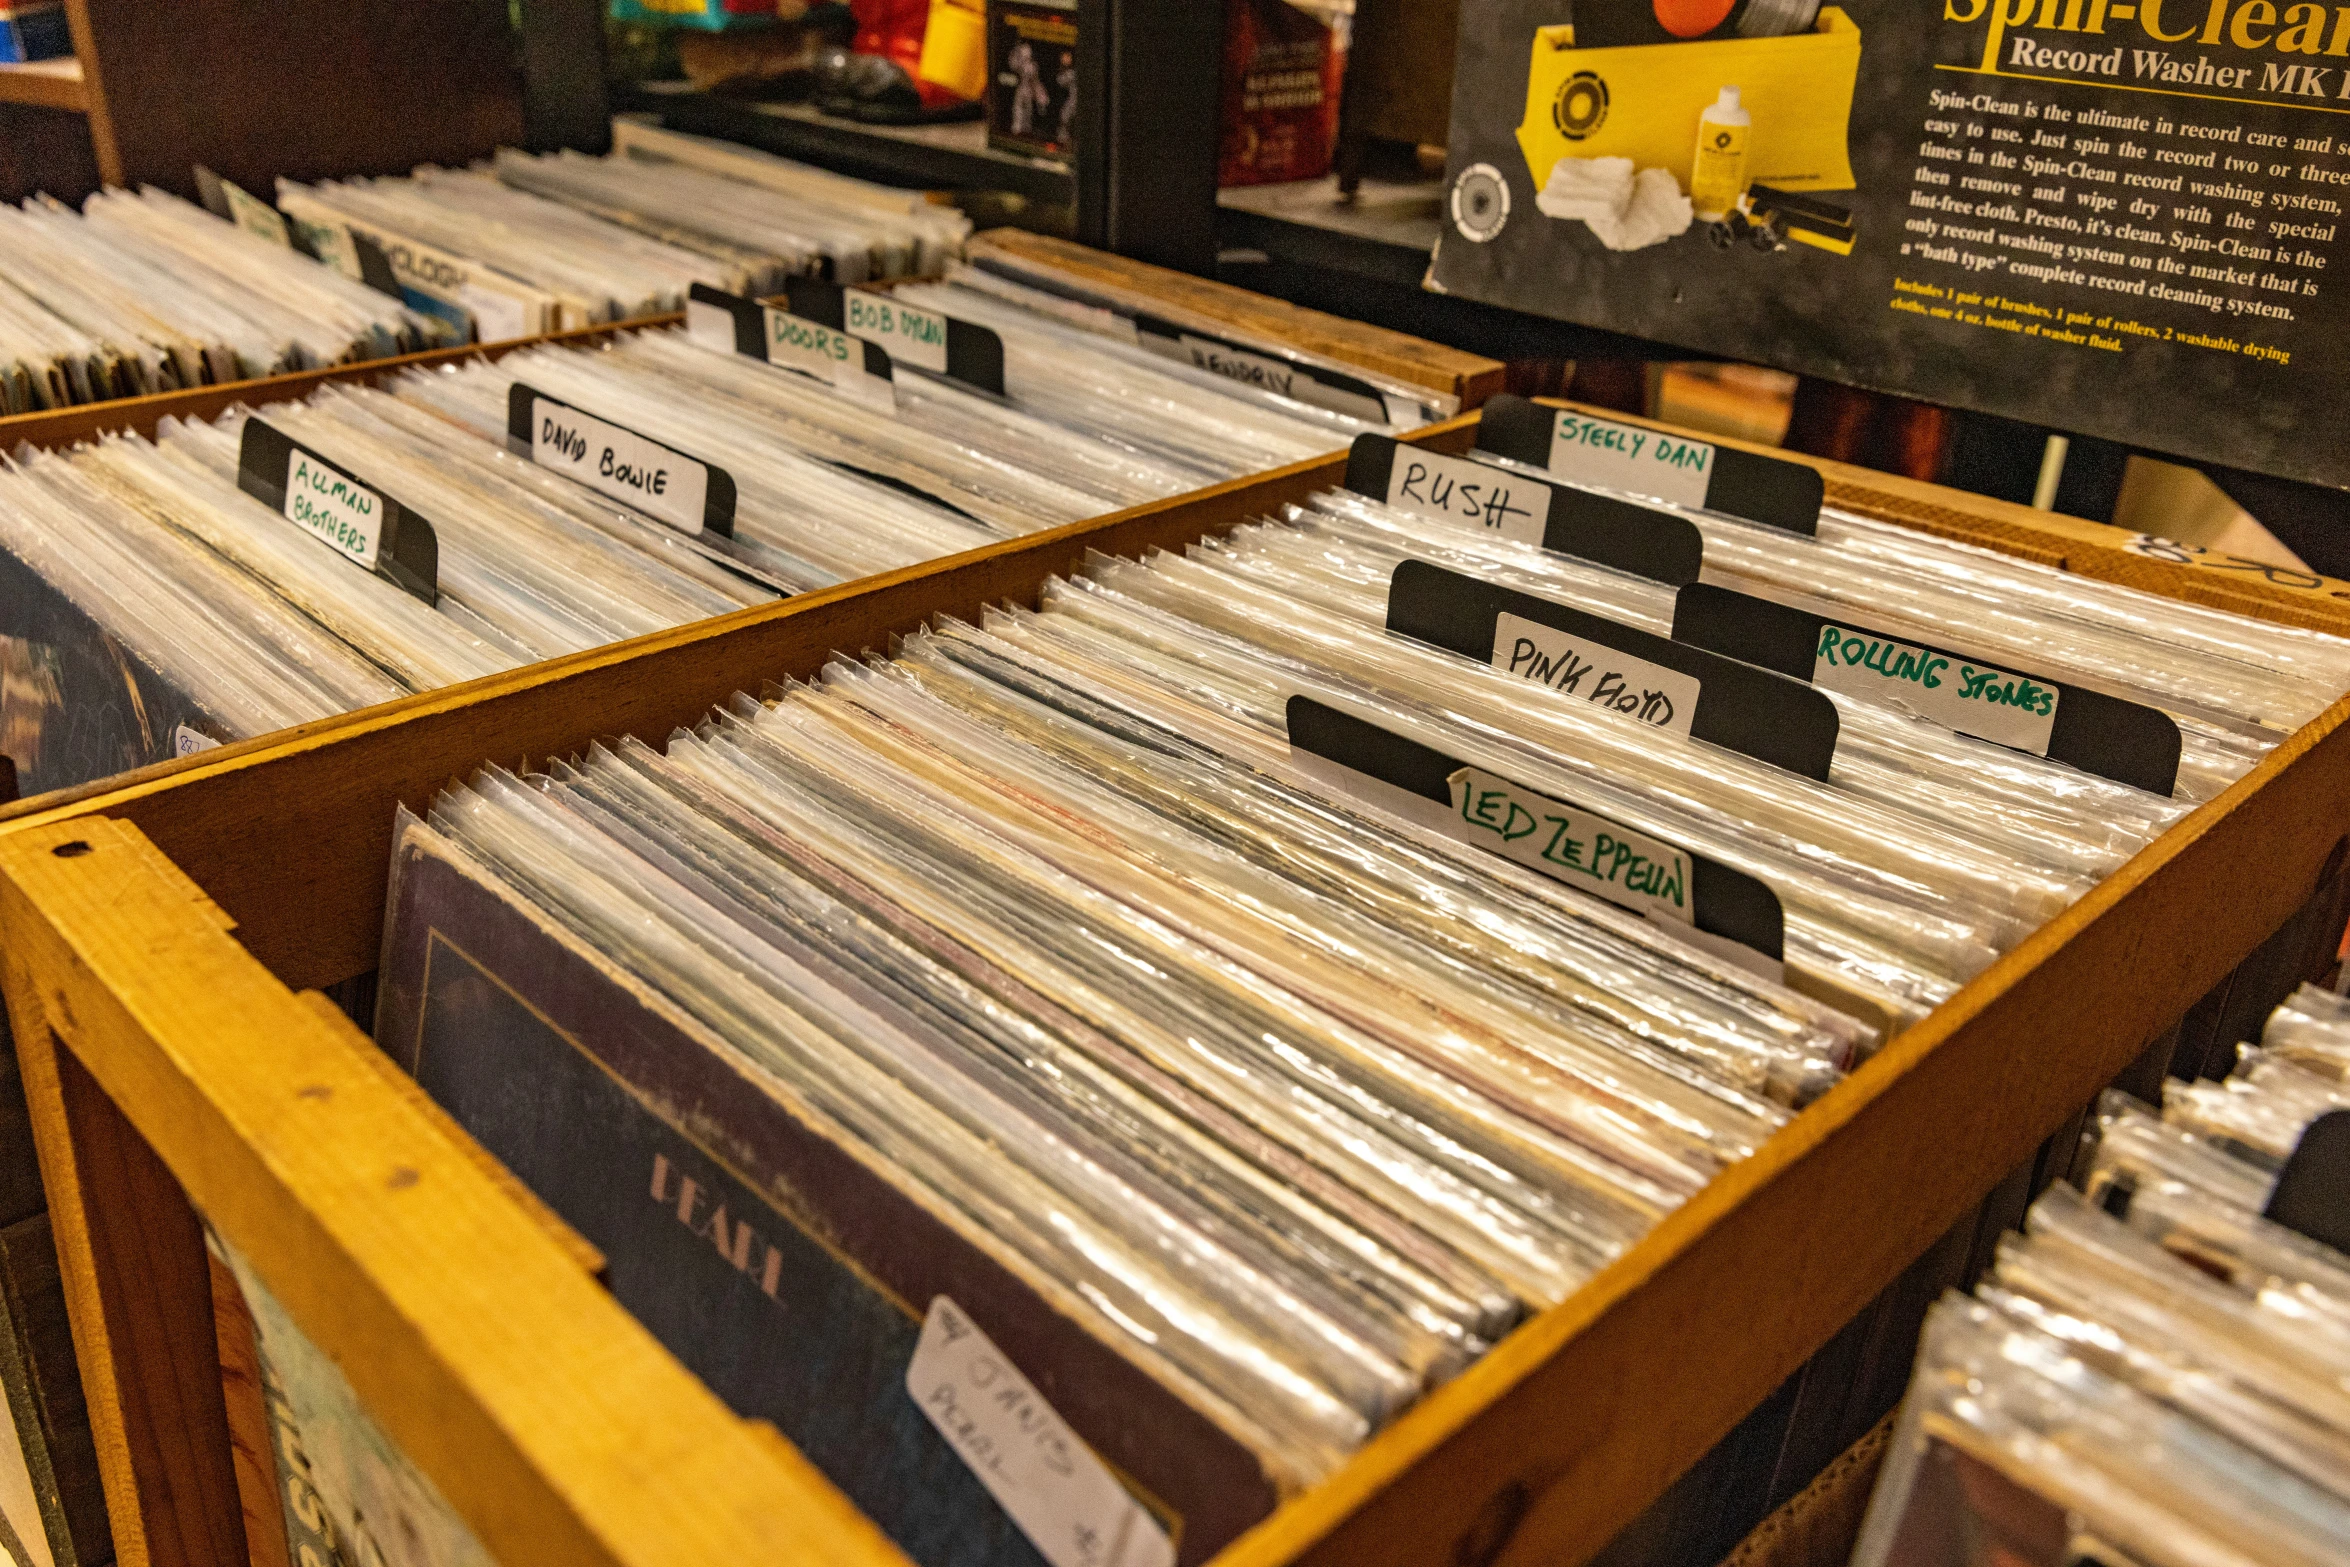 stacks of record records on sale in a store